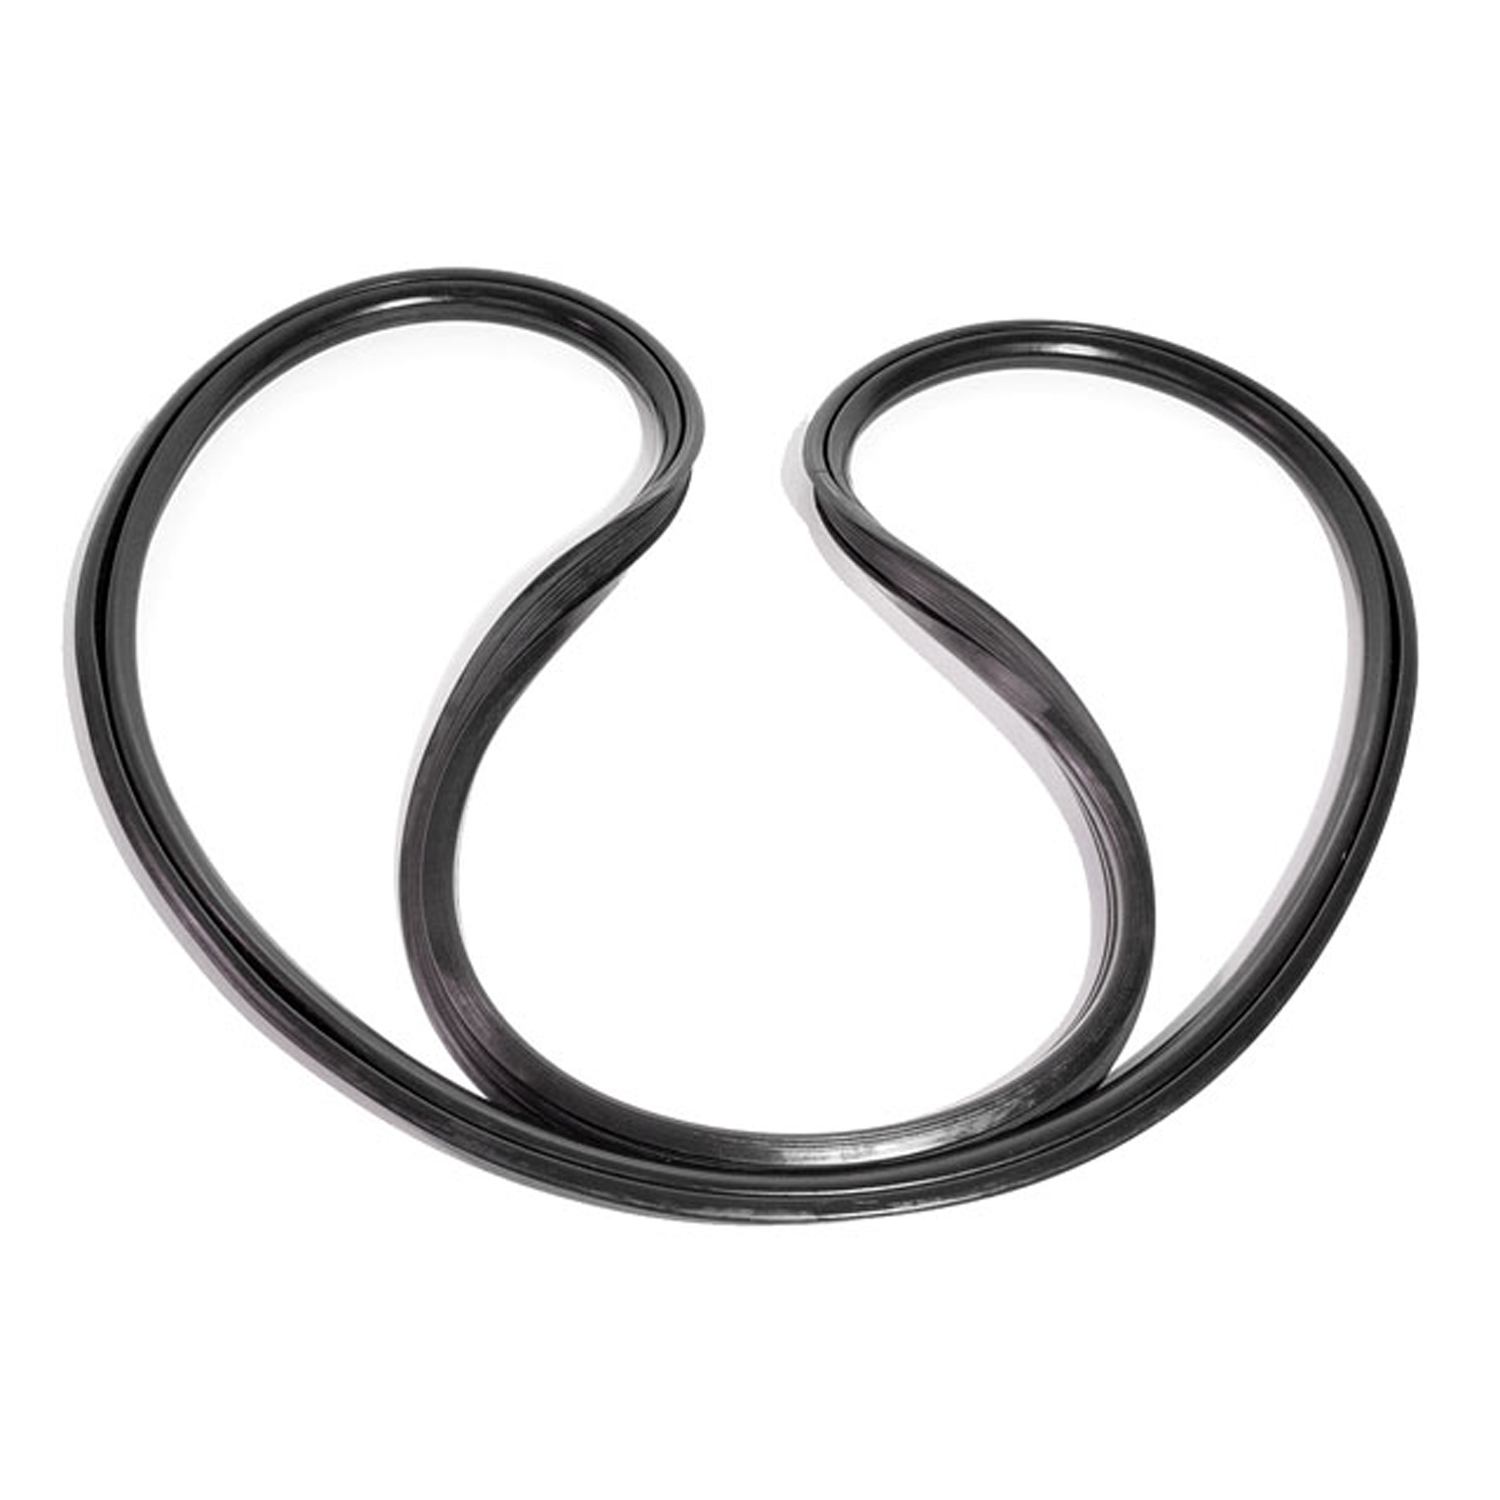 1952 Oldsmobile 98 Vulcanized Windshield Seal.  For hardtops and convertibles-VWS 7300